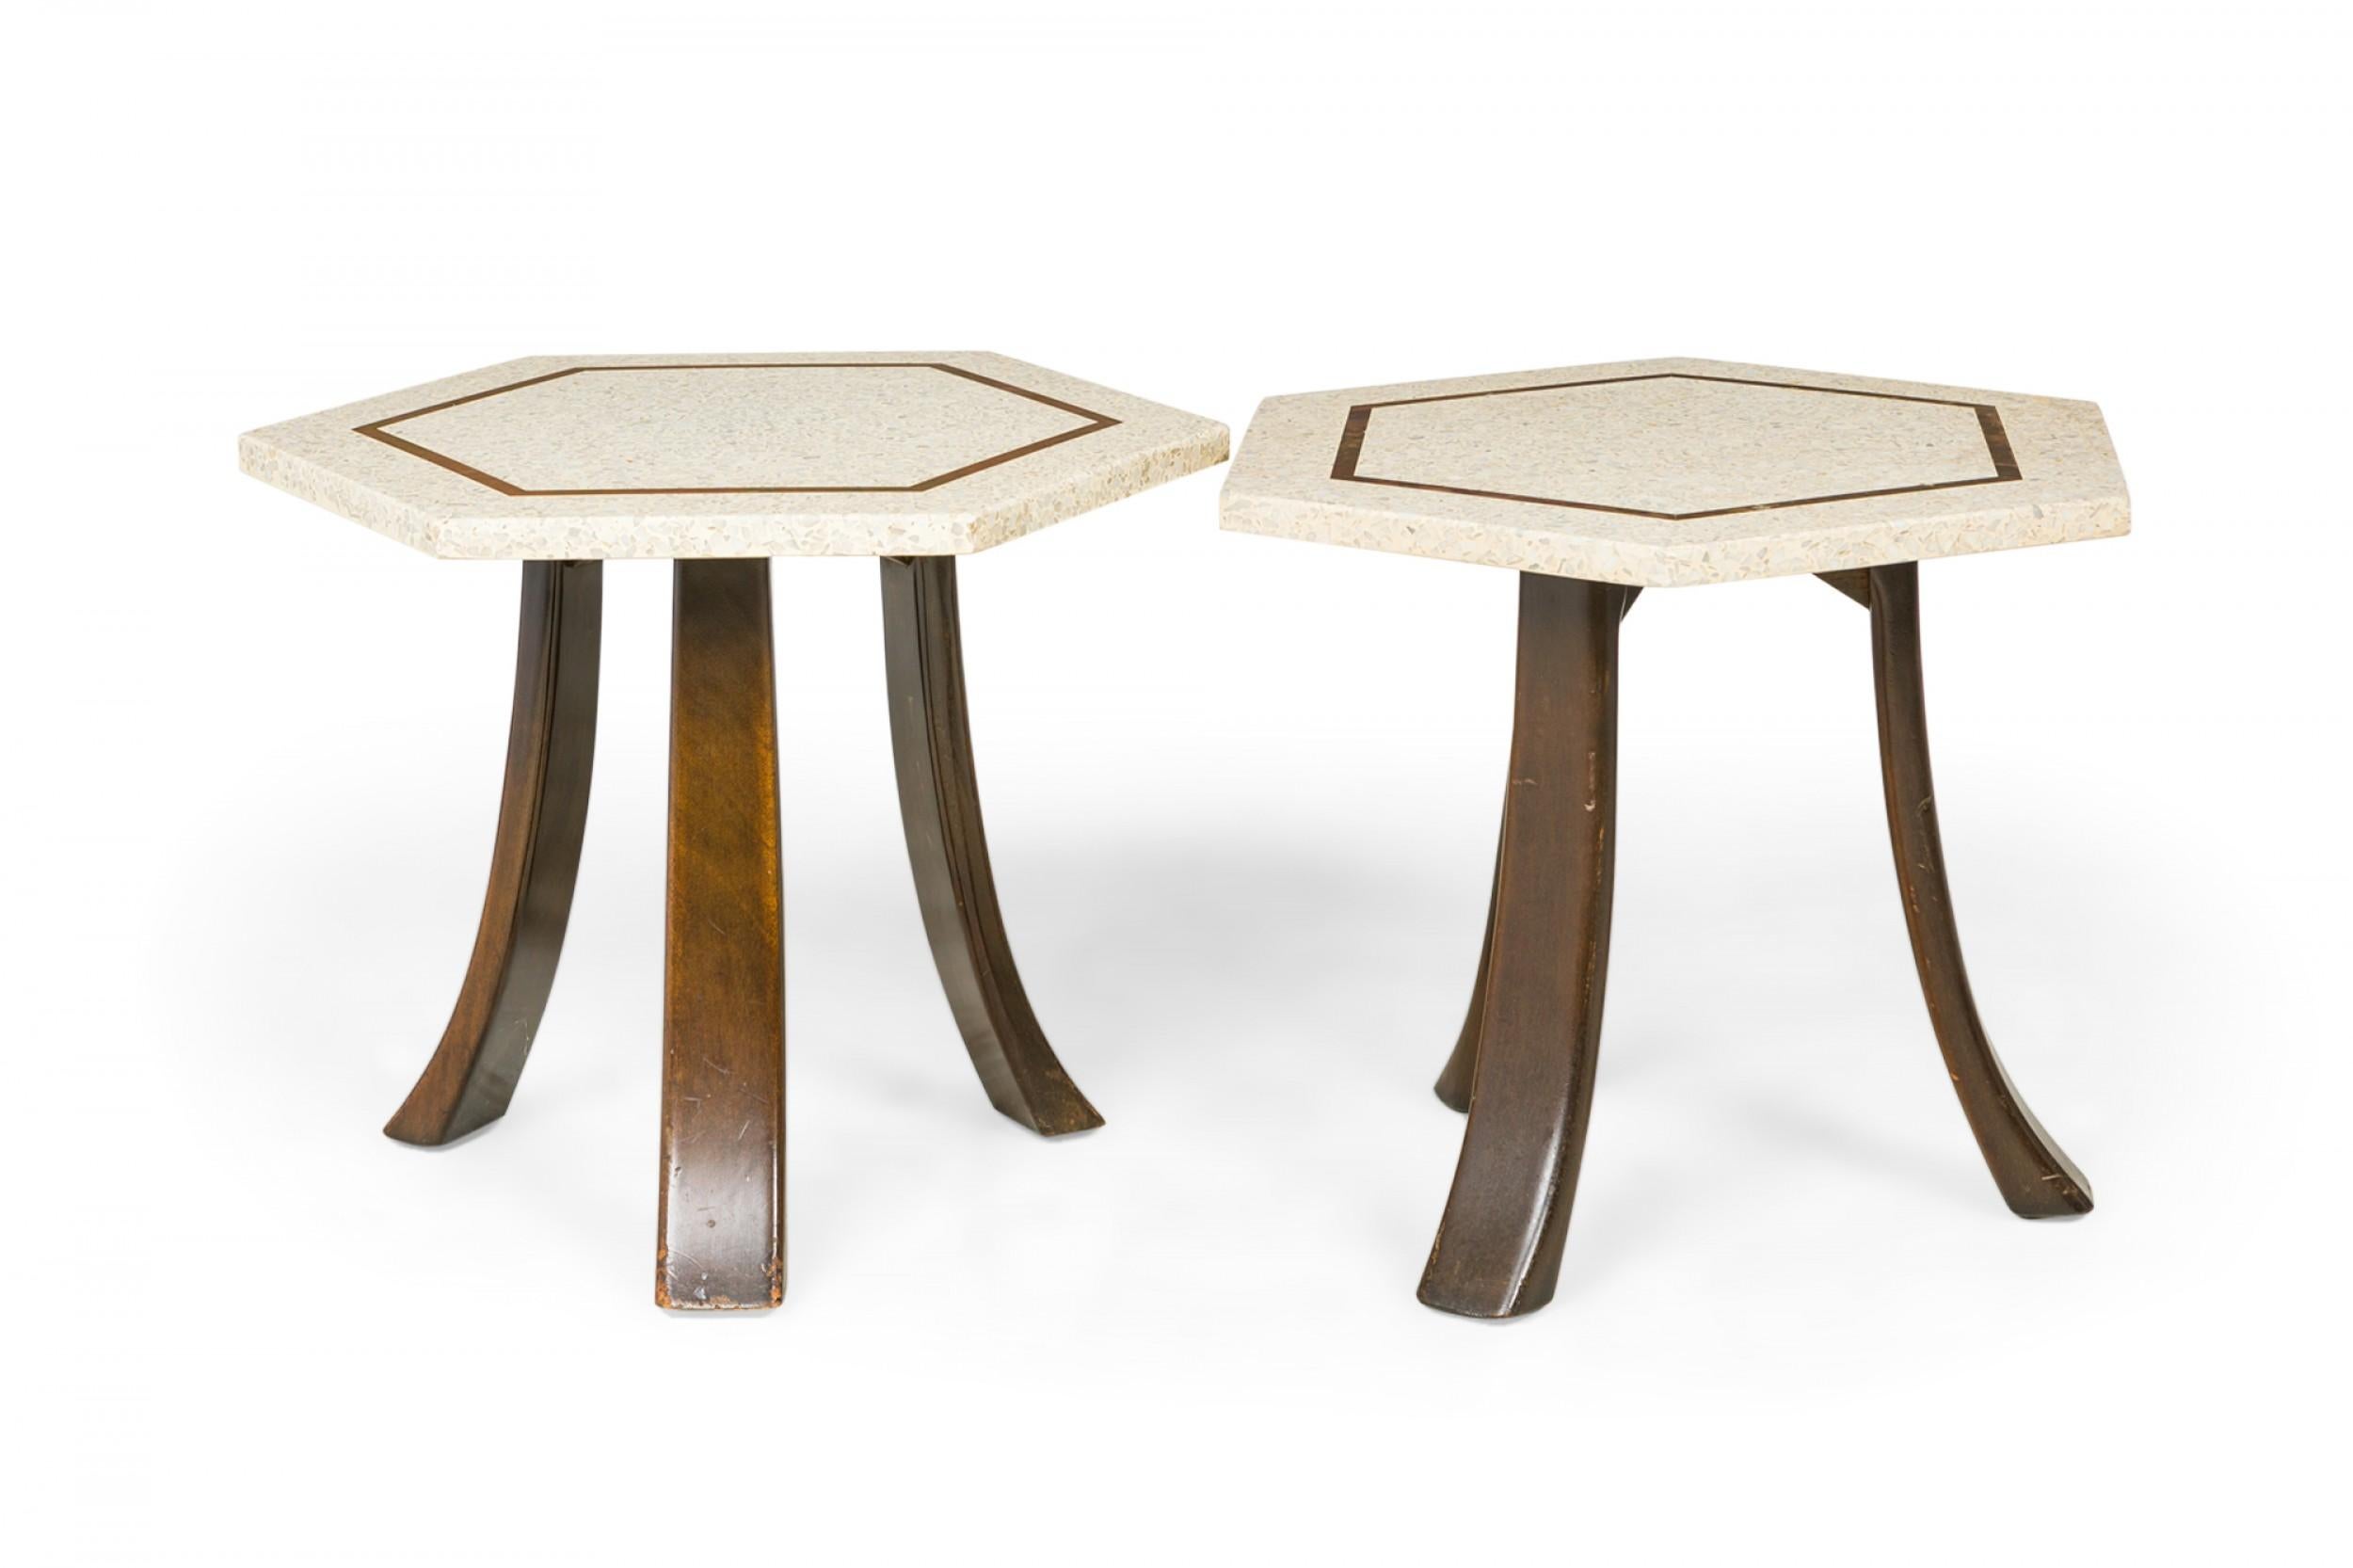 2 American Mid-Century end / side tables with hexagonal beige terrazzo tops with a bronze inlaid hexagonal design supported on three curved dark wooden legs. (HARVEY PROBBER)(PRICED EACH).
 